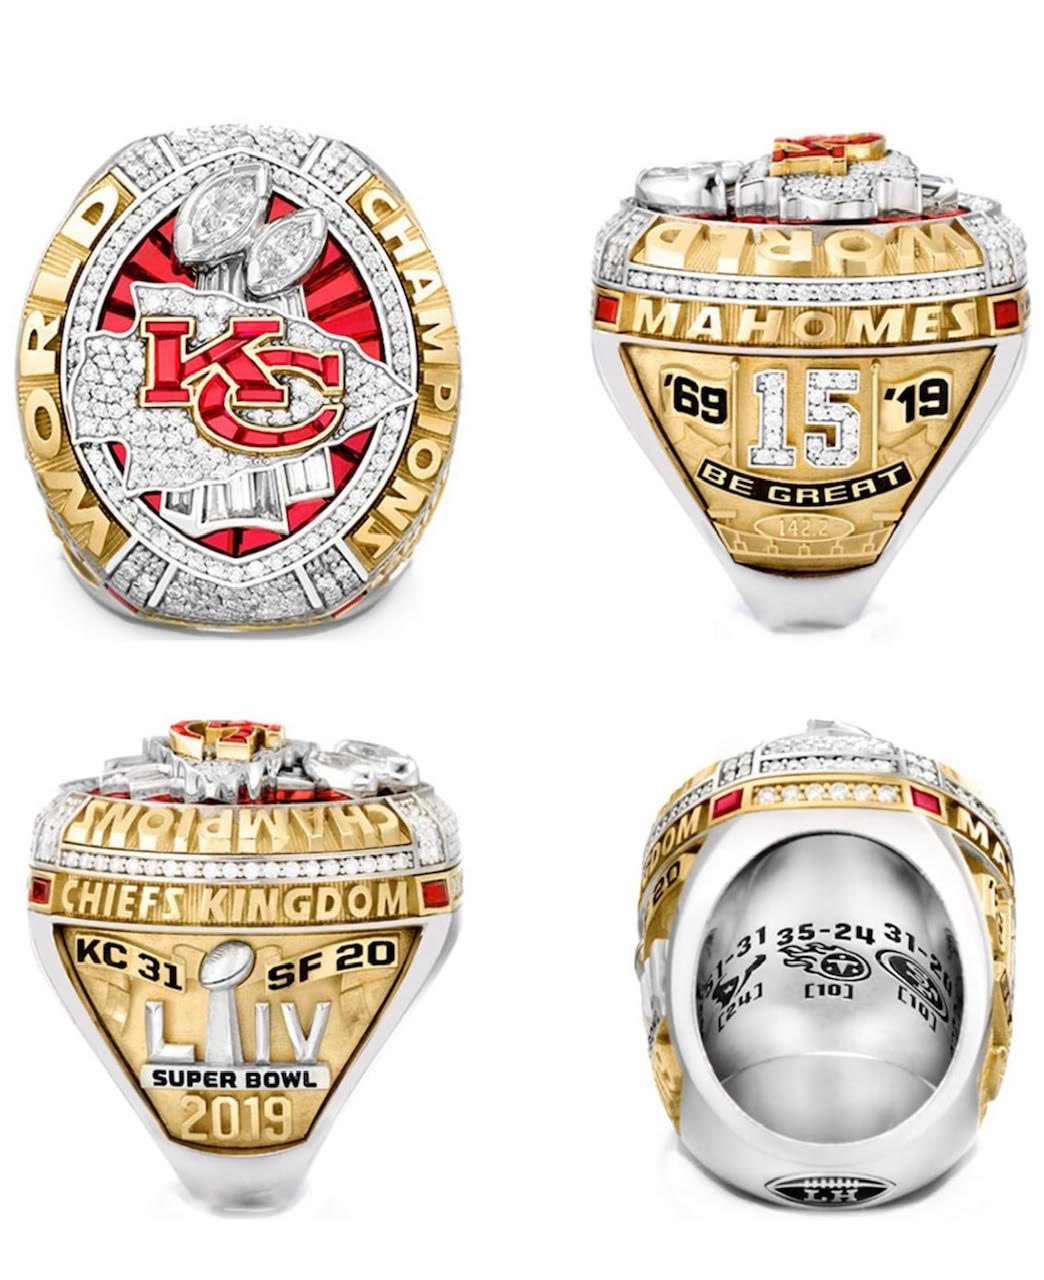 Counterfeit Patrick Mahomes Chiefs Super Bowl Rings Seized as Part